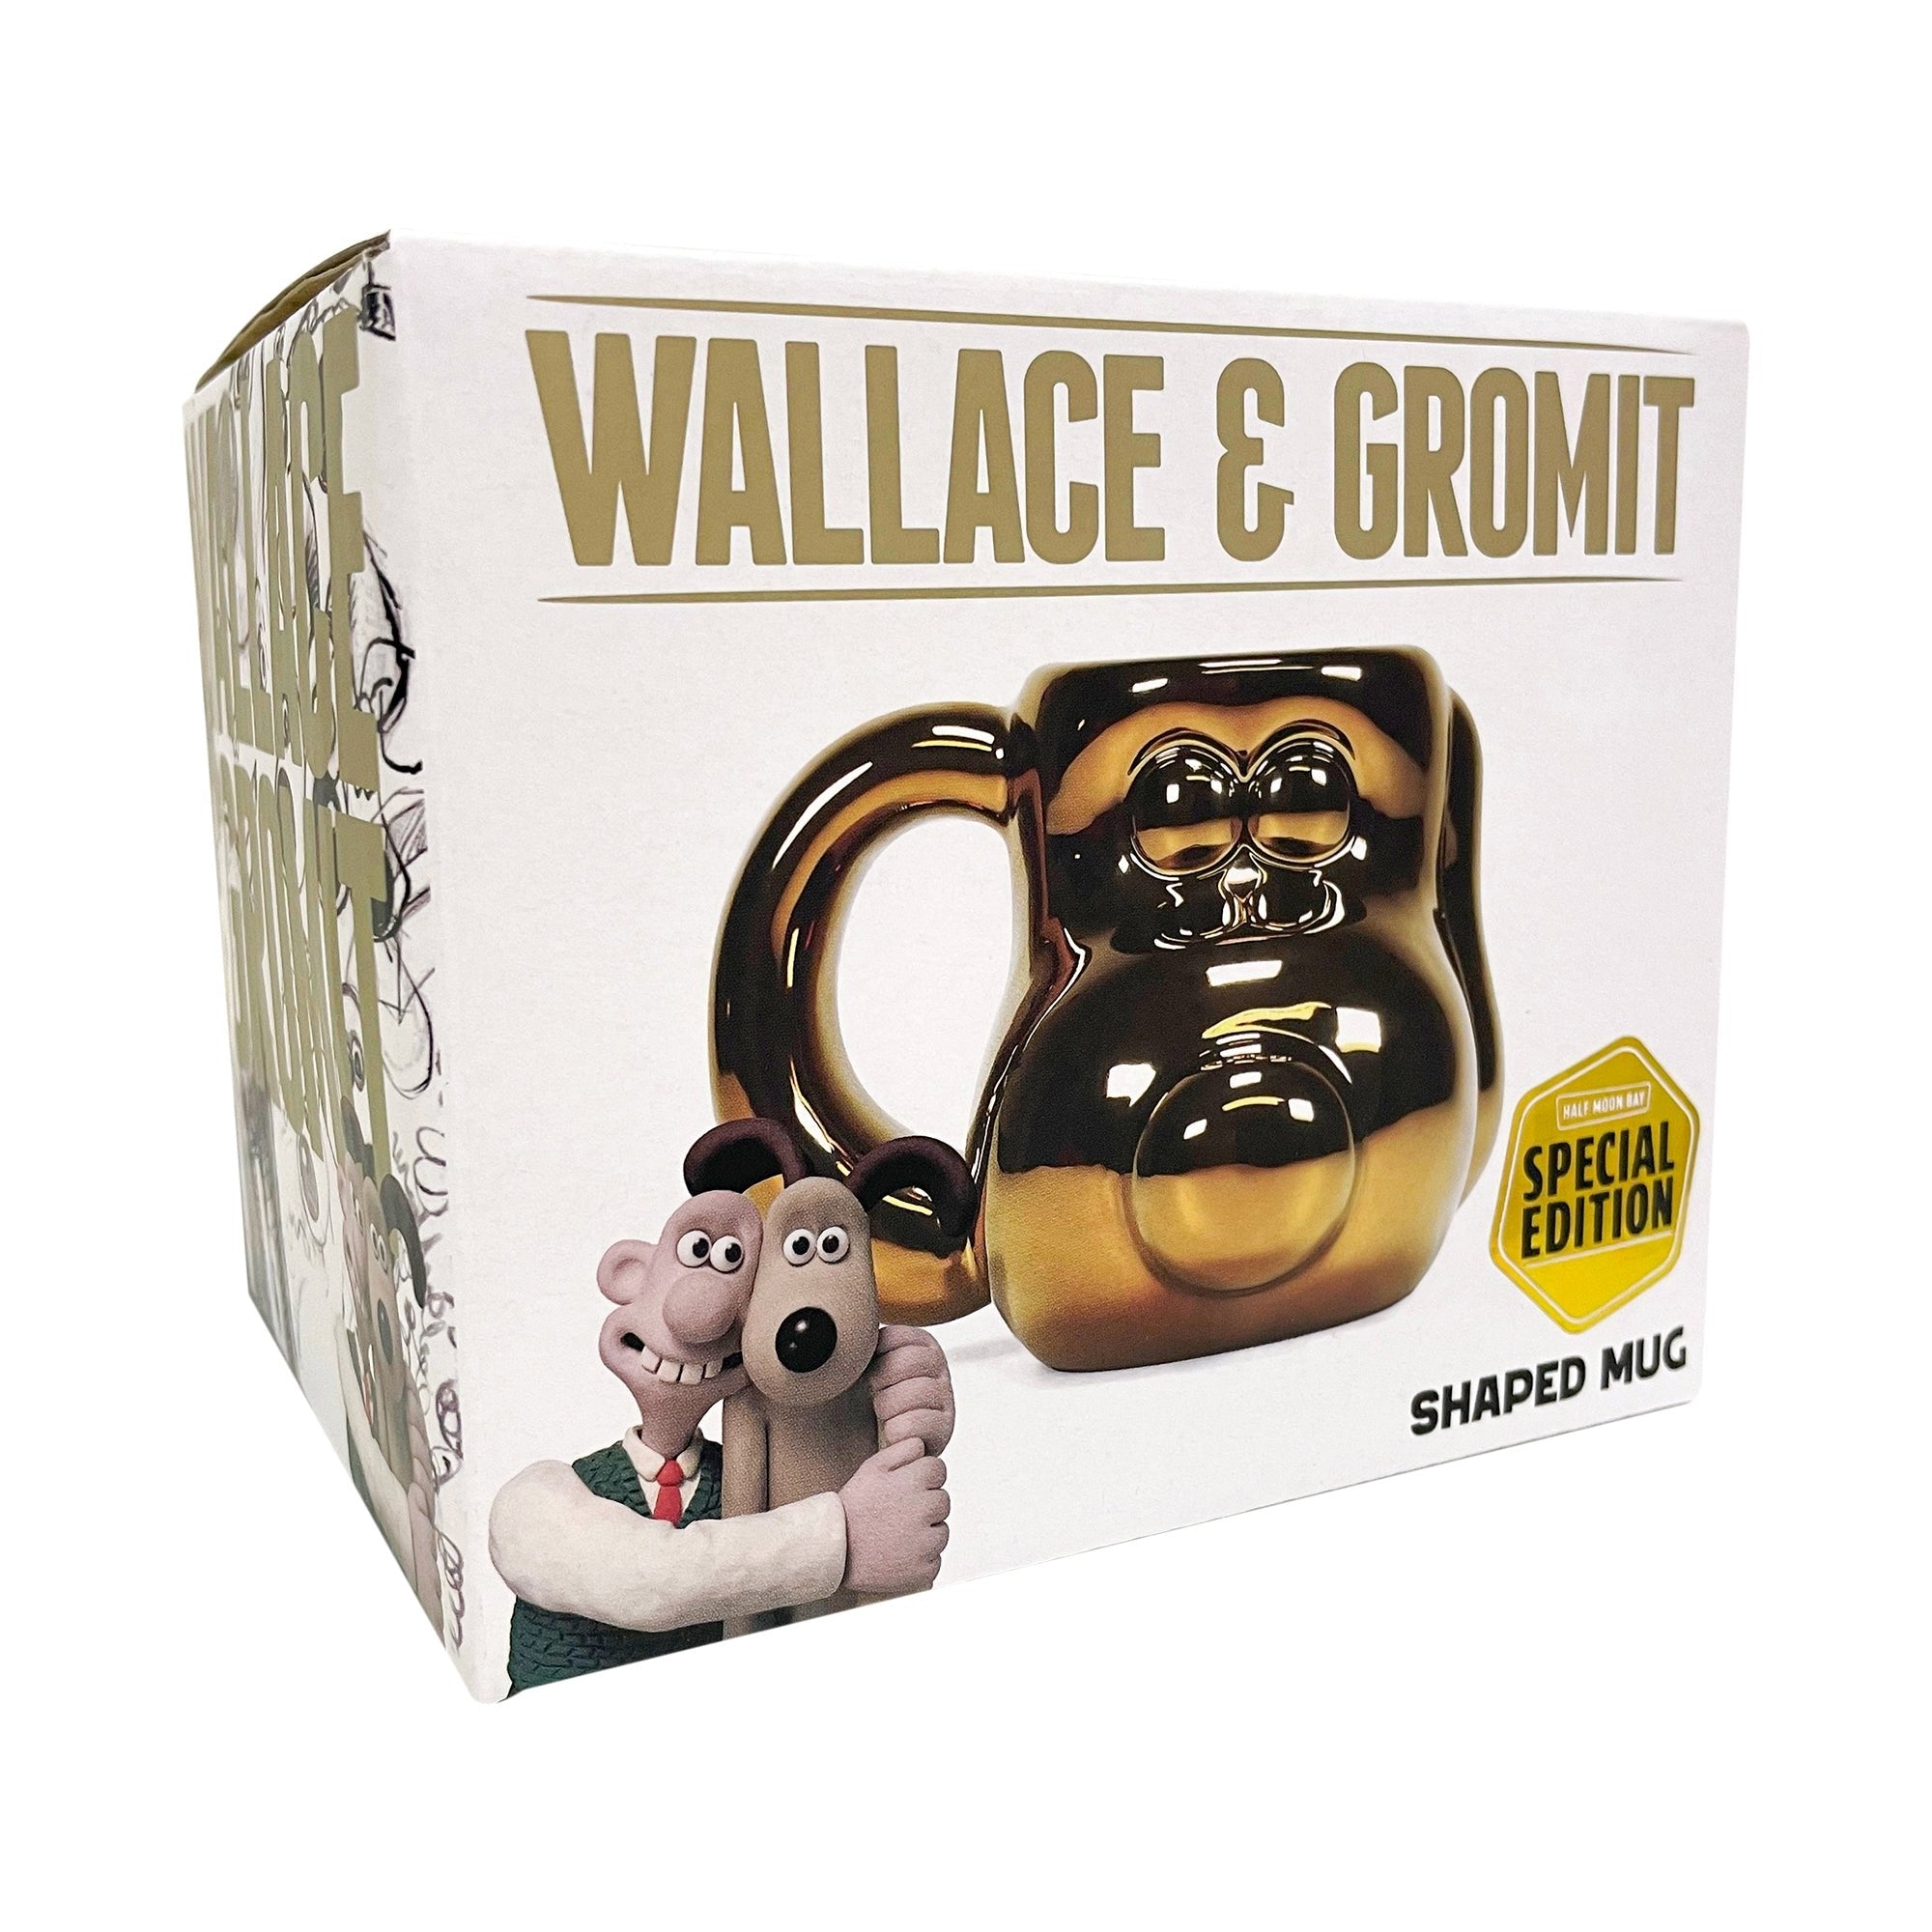 Wallace & Gromit Special Edition Shaped Mug - Gold Gromit